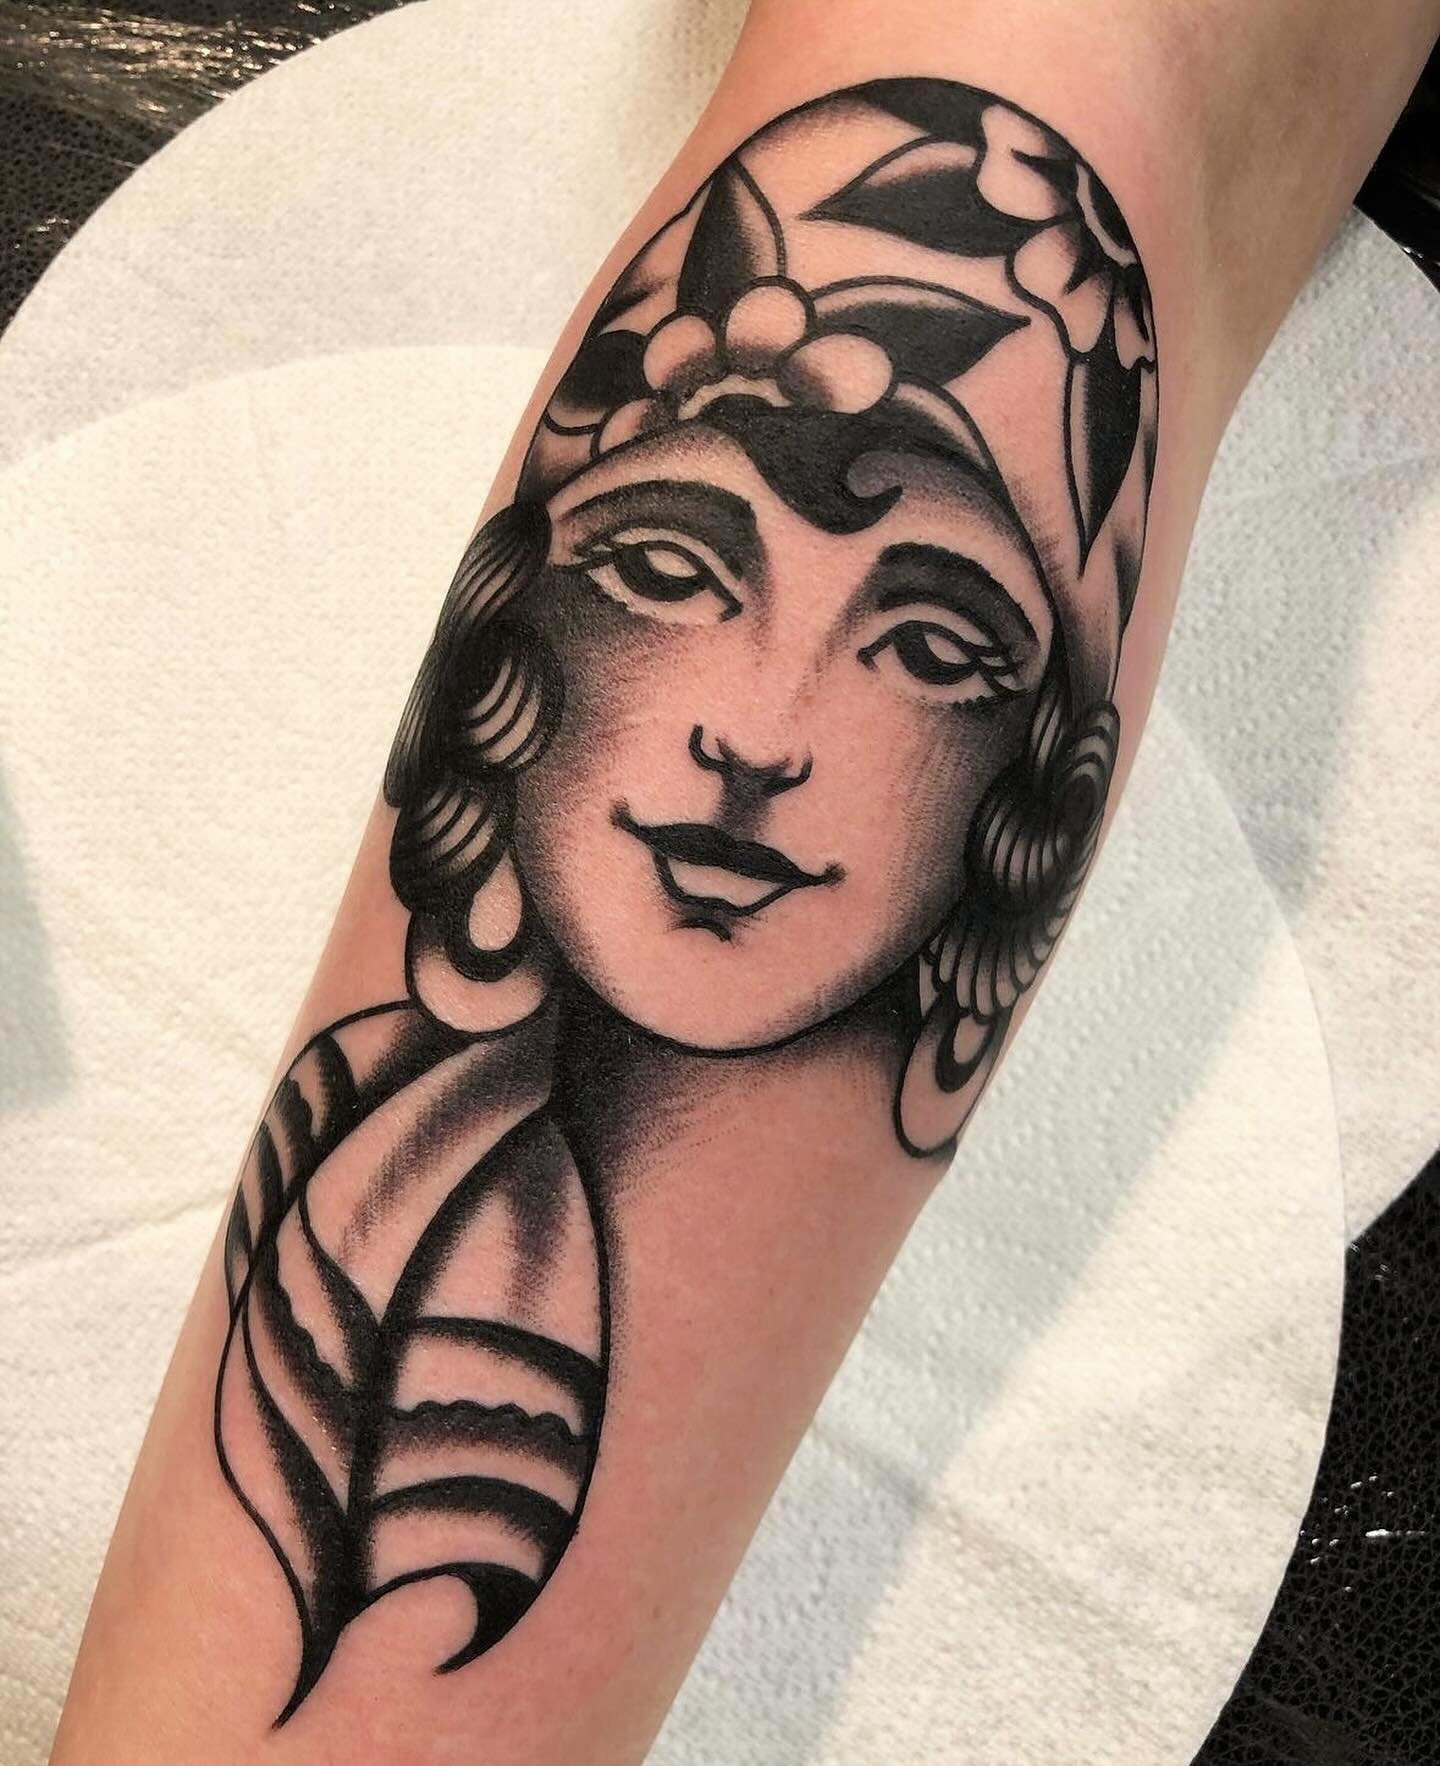 @j.betts.tattoo has a few slots available on Saturday the 27th of April - DM @j.betts.tattoo or us to book in!📲

Non-refundable deposit required so secure your slot💸.
.
.
.
#tattoo #tattooart #tattooartist #tattoos #tattooed #tattoolife #tattooist 